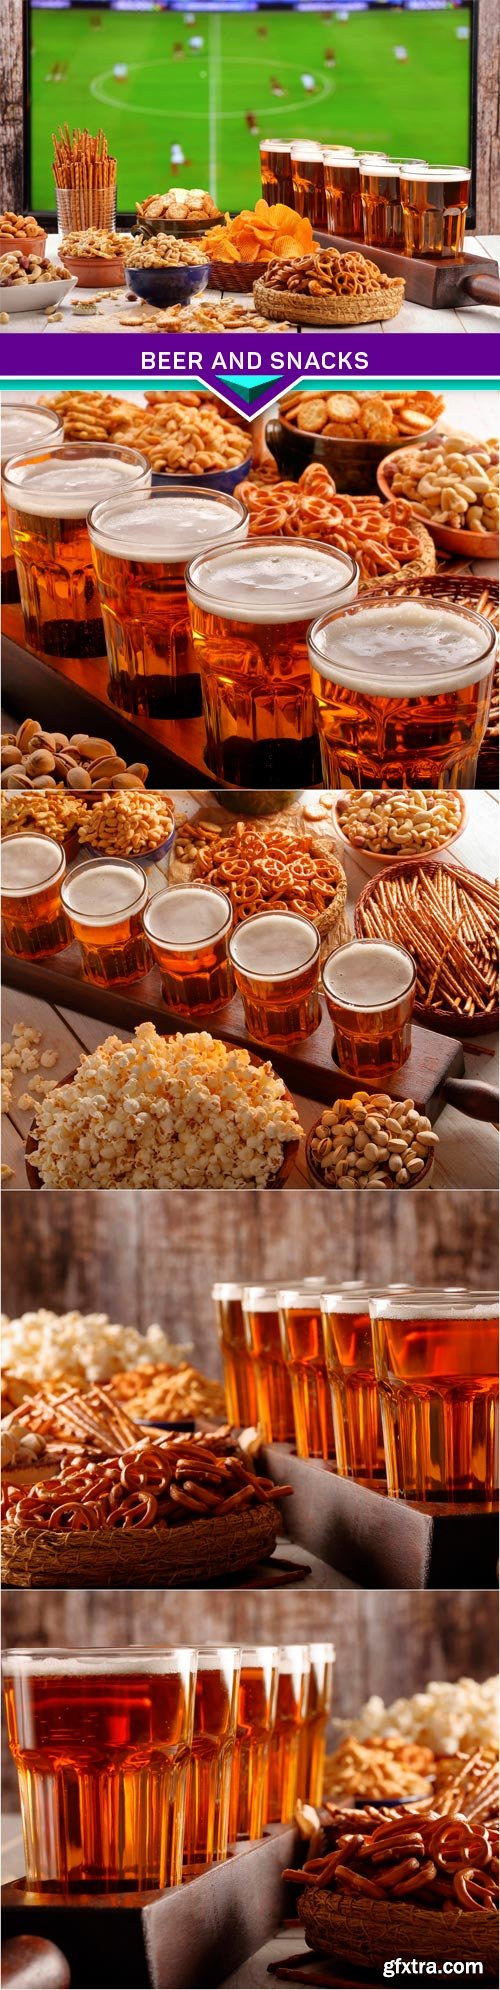 Beer and snacks on wooden background football fan set 5X JPEG